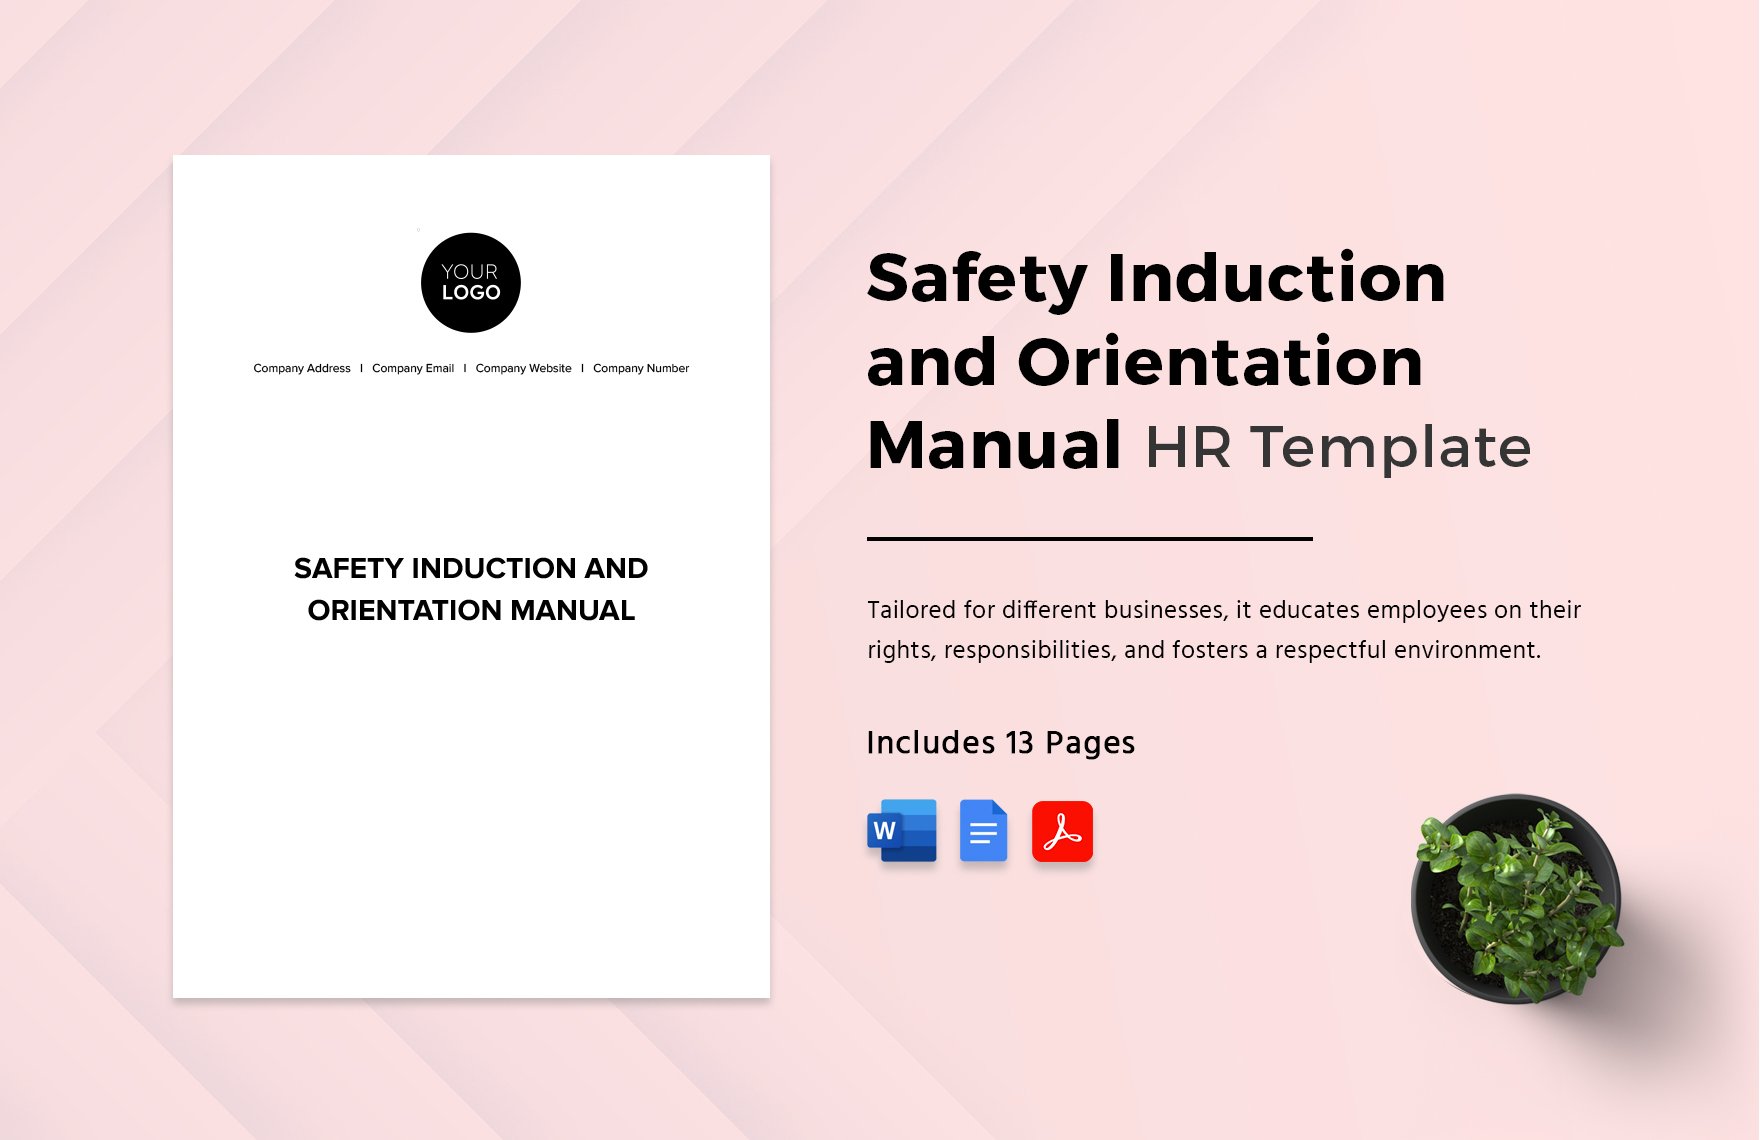 Safety Induction and Orientation Manual HR Template